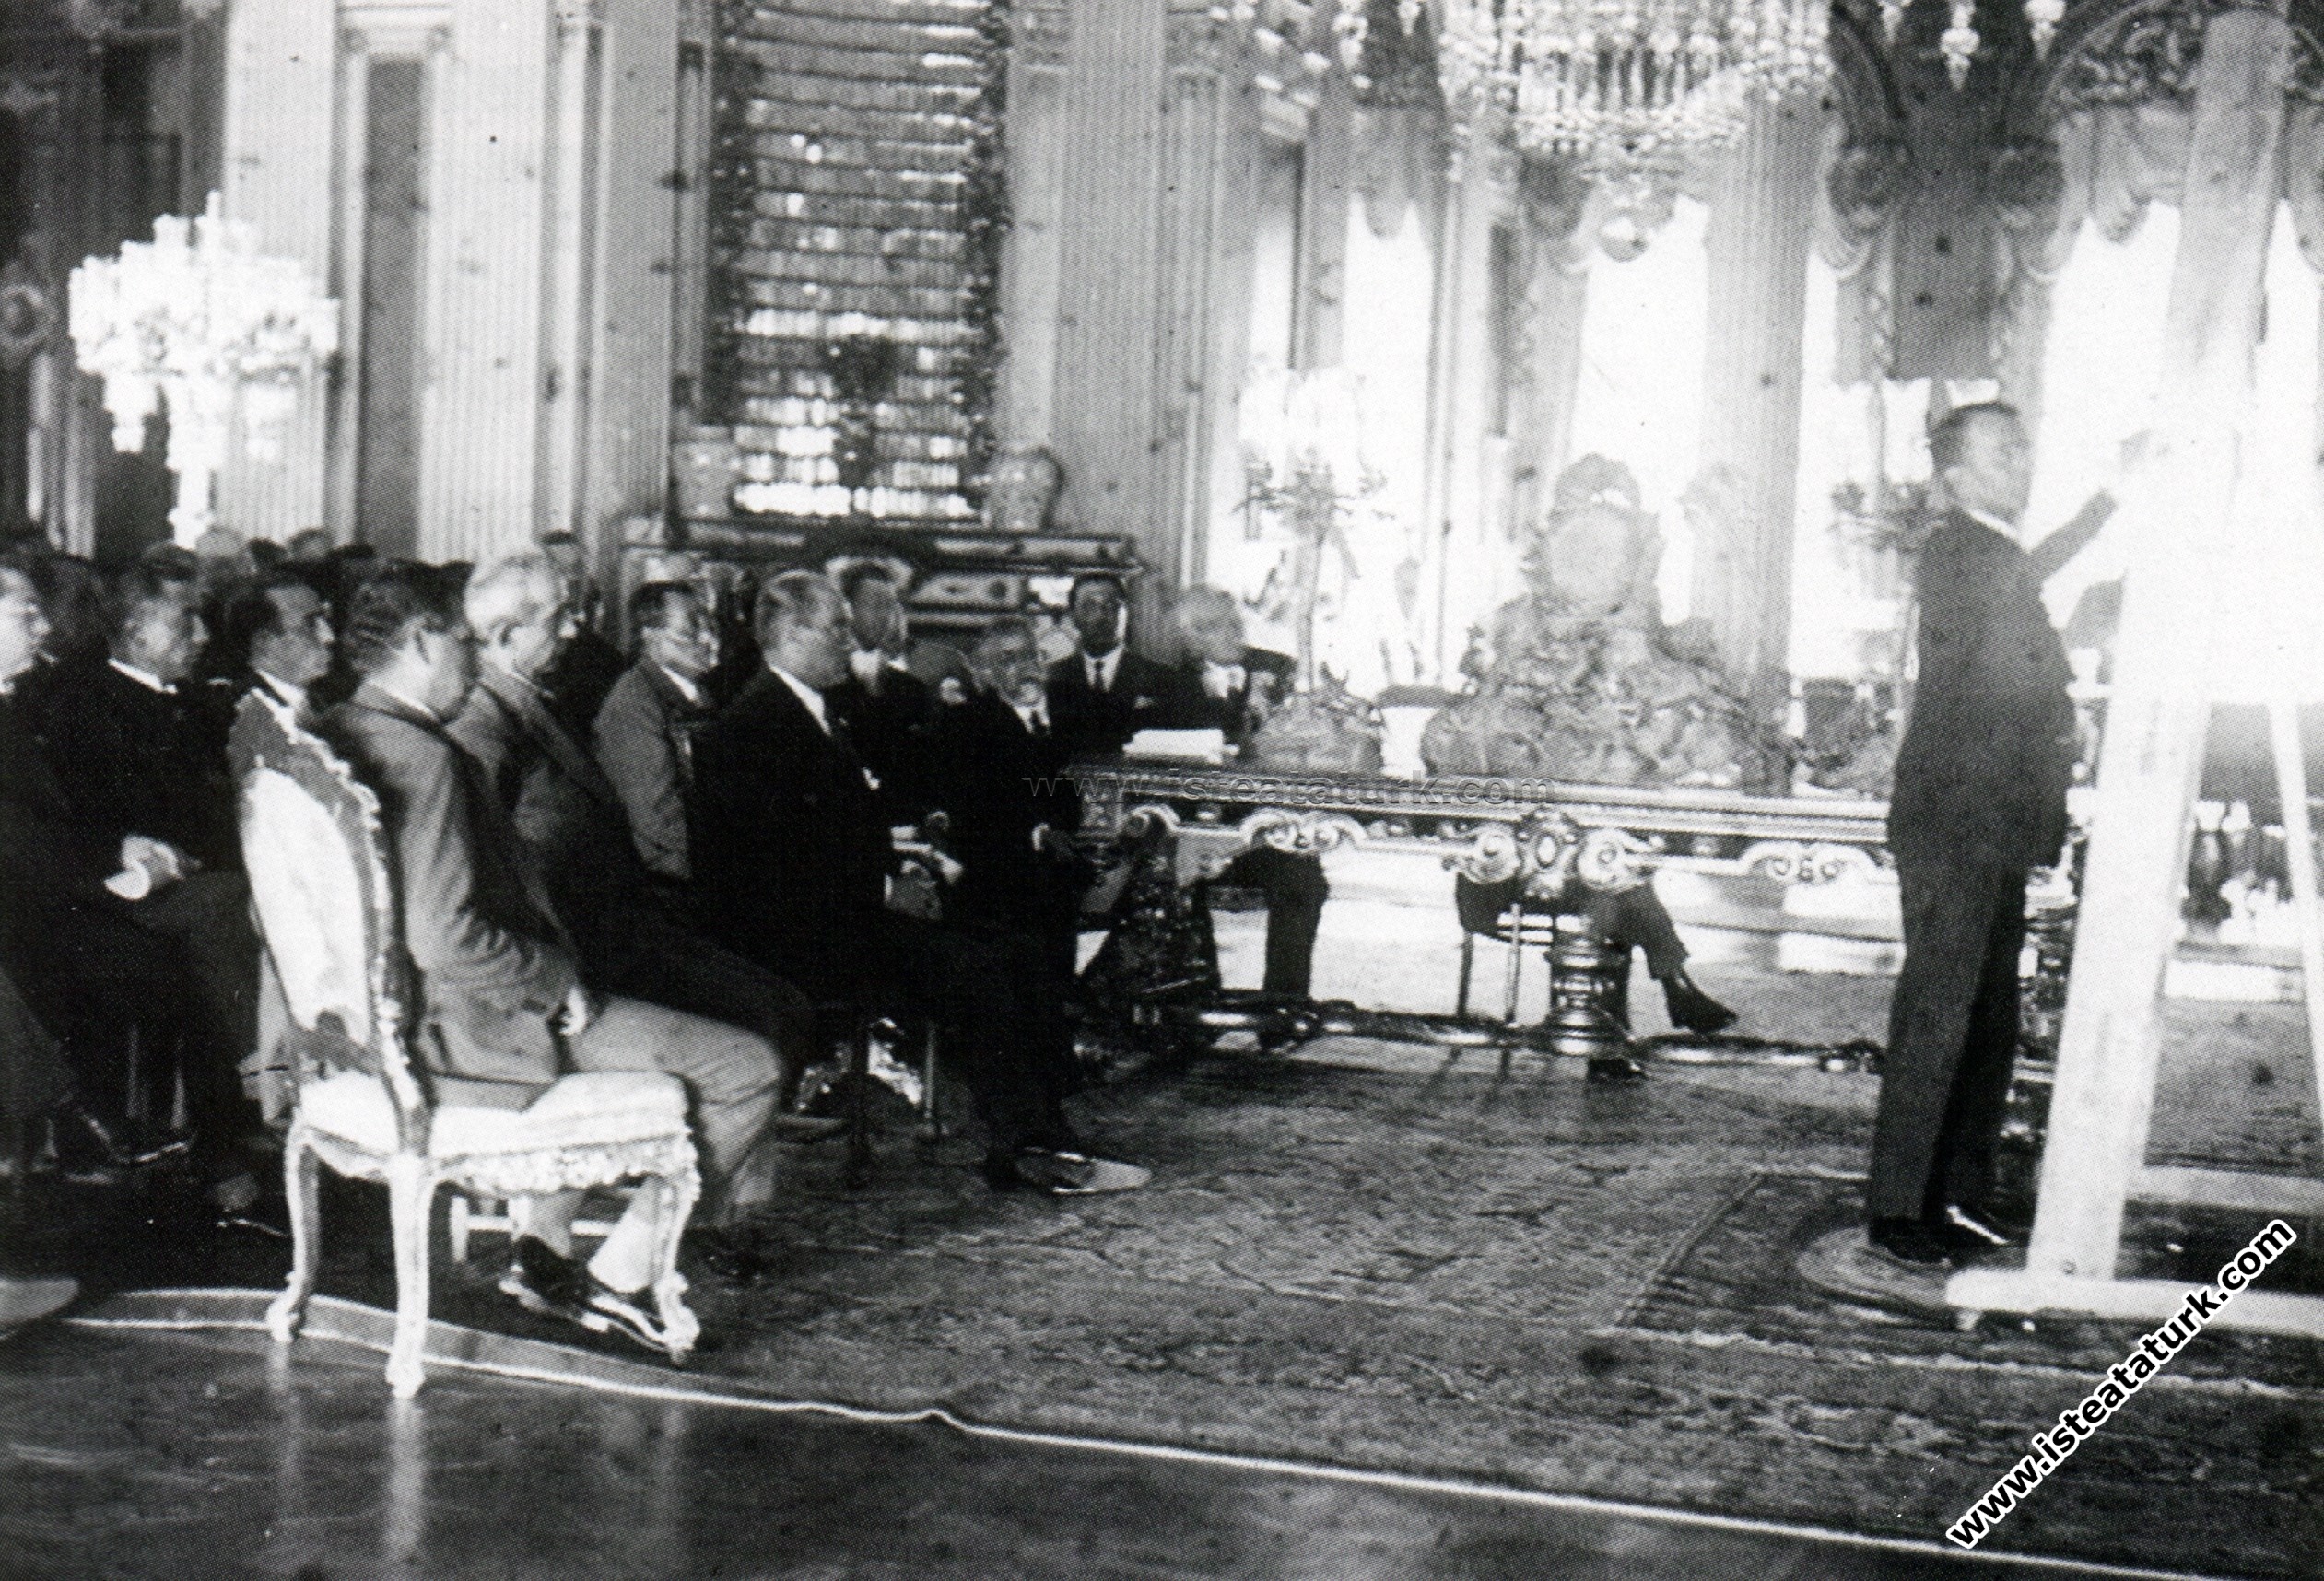 İsmet İnönü at one of the meetings on New Letters ...